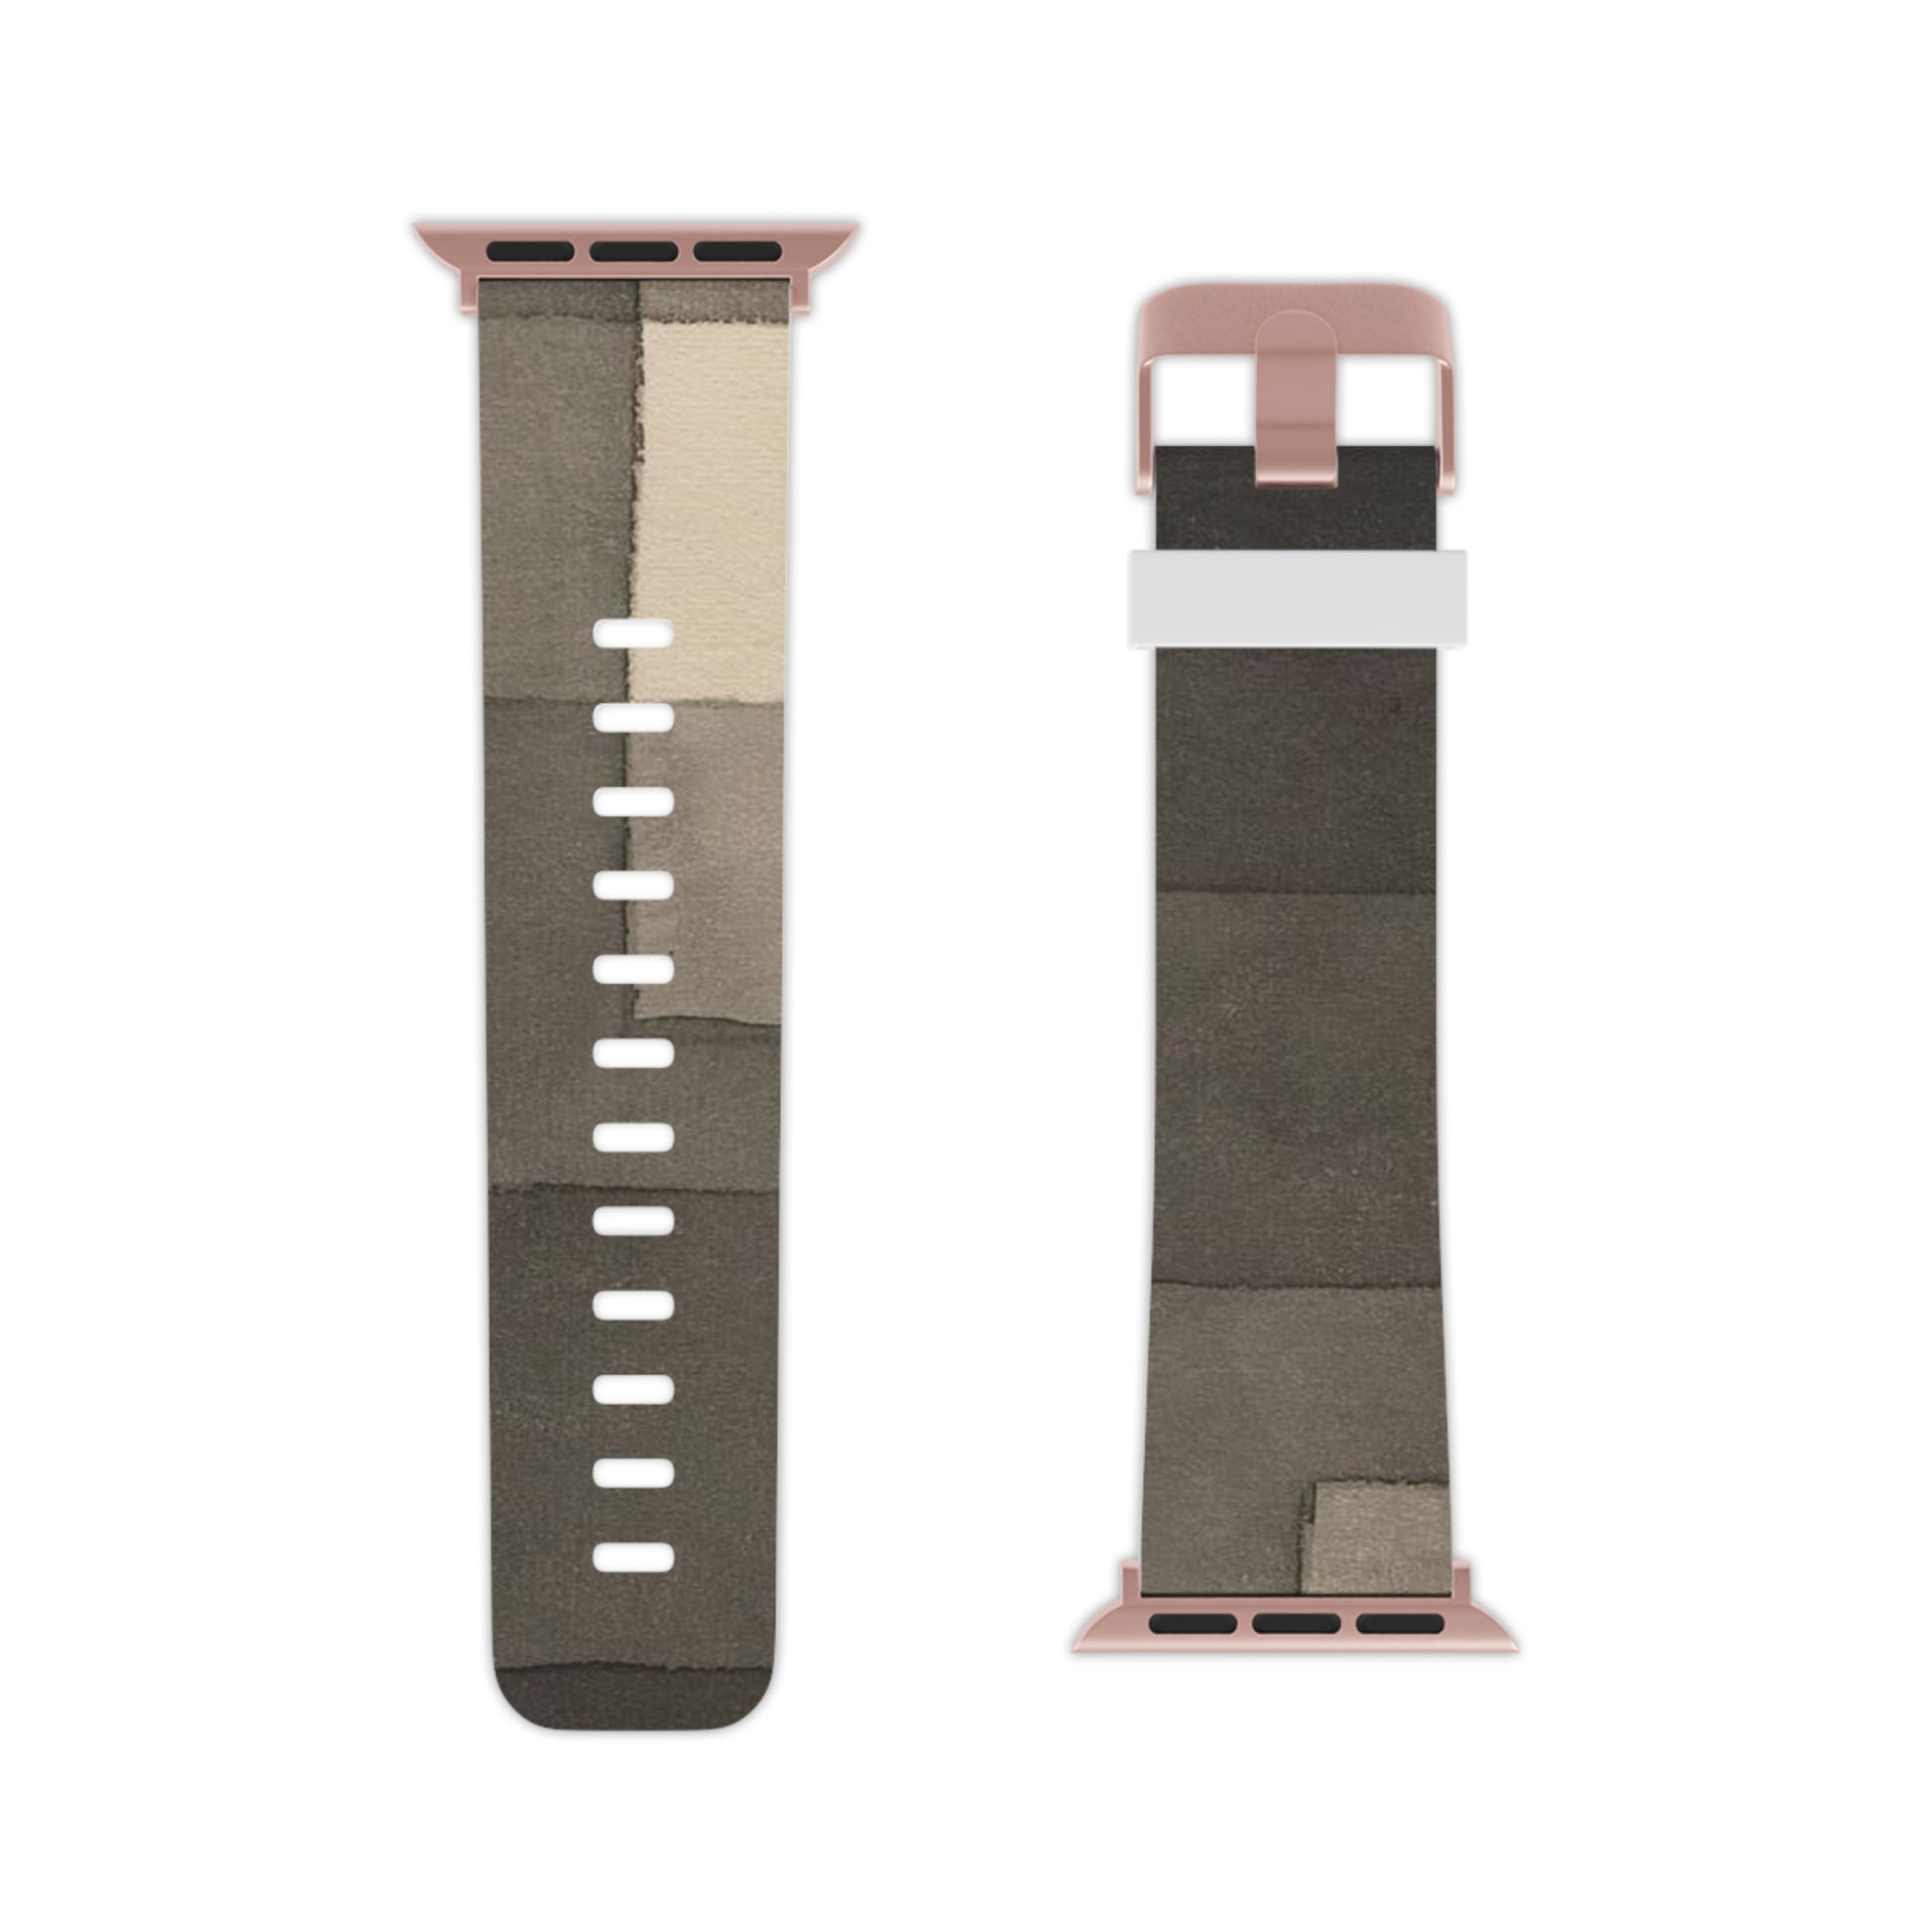 PAUL KLEE - TWO WAYS - ART WATCH BAND FOR APPLE WATCH